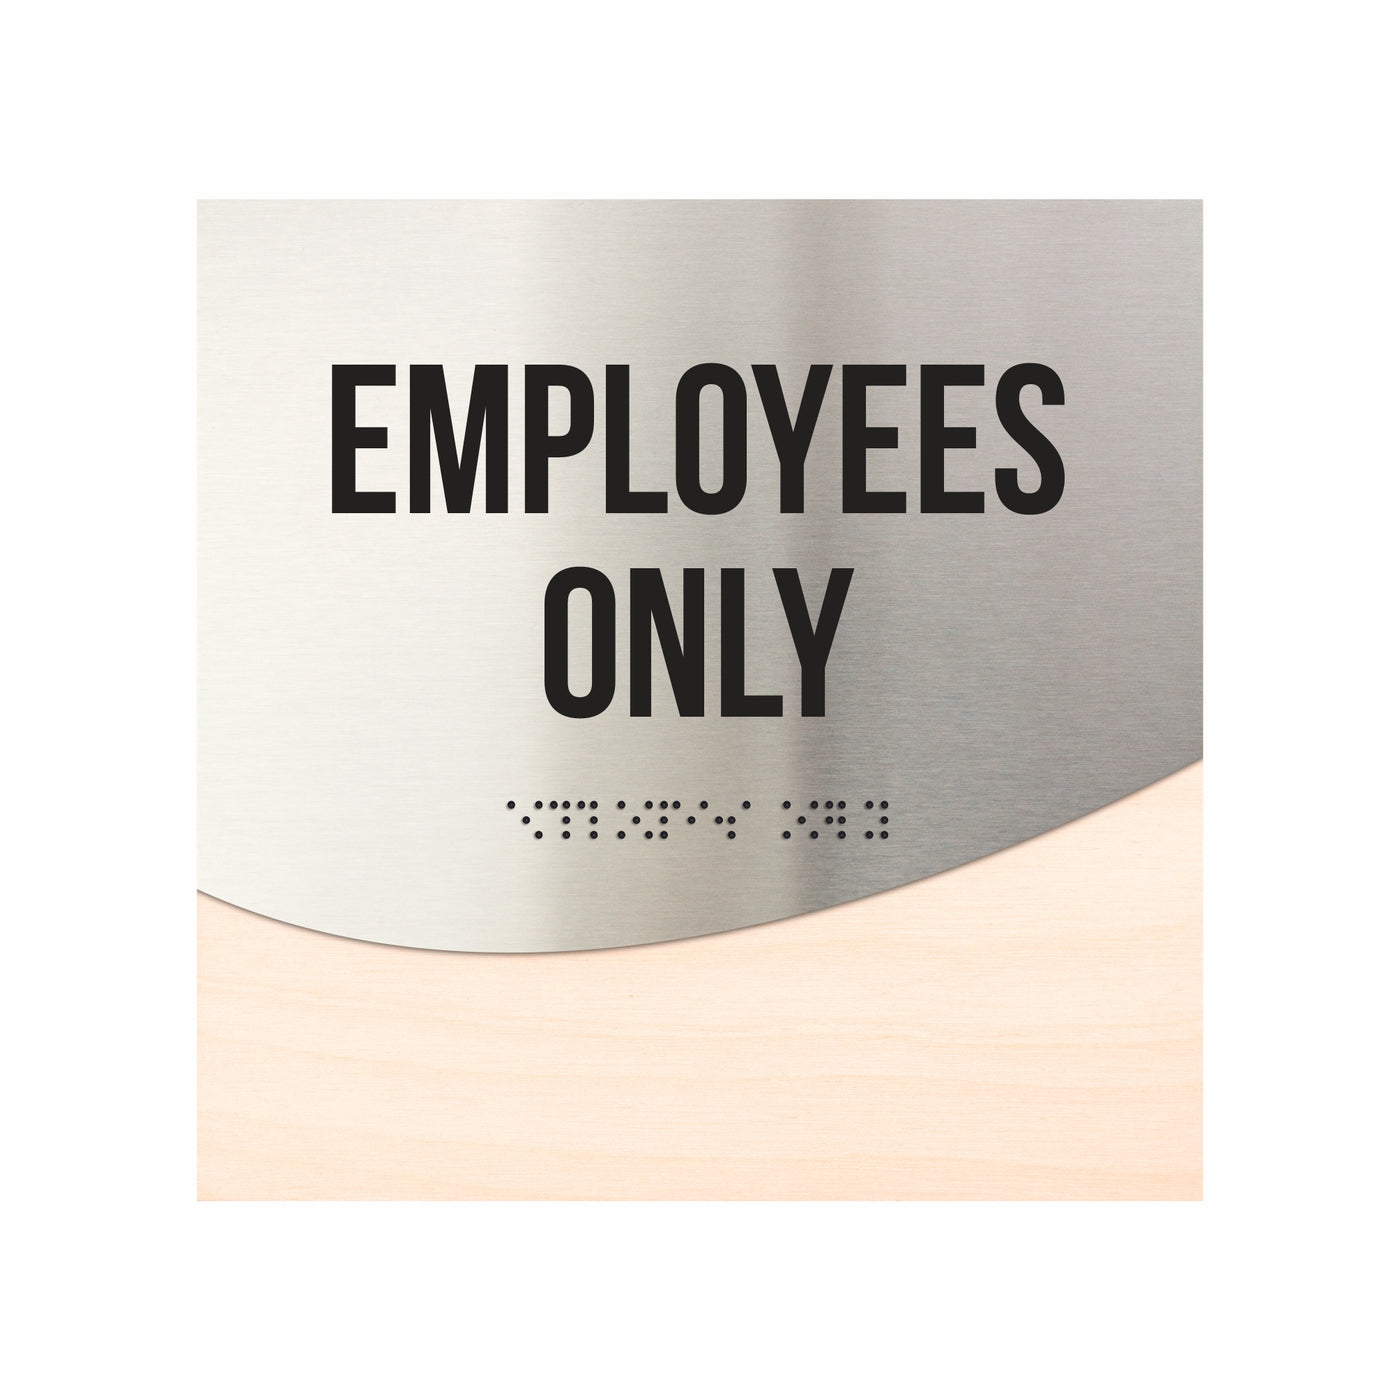 Door Signs - Employees Only Sign - Stainless Steel & Wood "Jure" Design